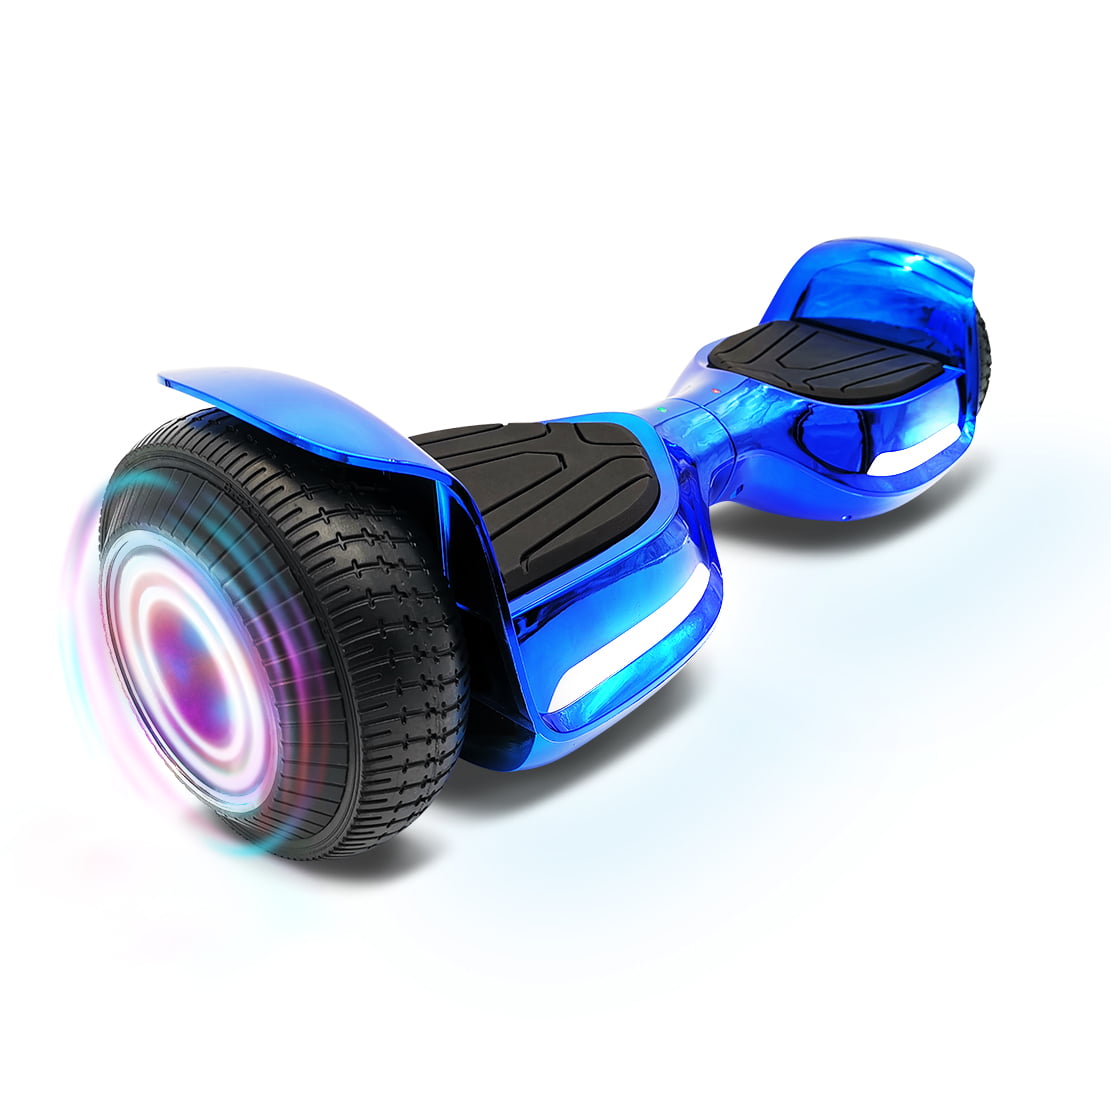 Rawrr Hoverboard Self Balancing Electric Scooter with LED Lights and Bluetooth Speaker for Kids and Adults, UL2272 Certified, Transforming Color Silver) - Walmart.com